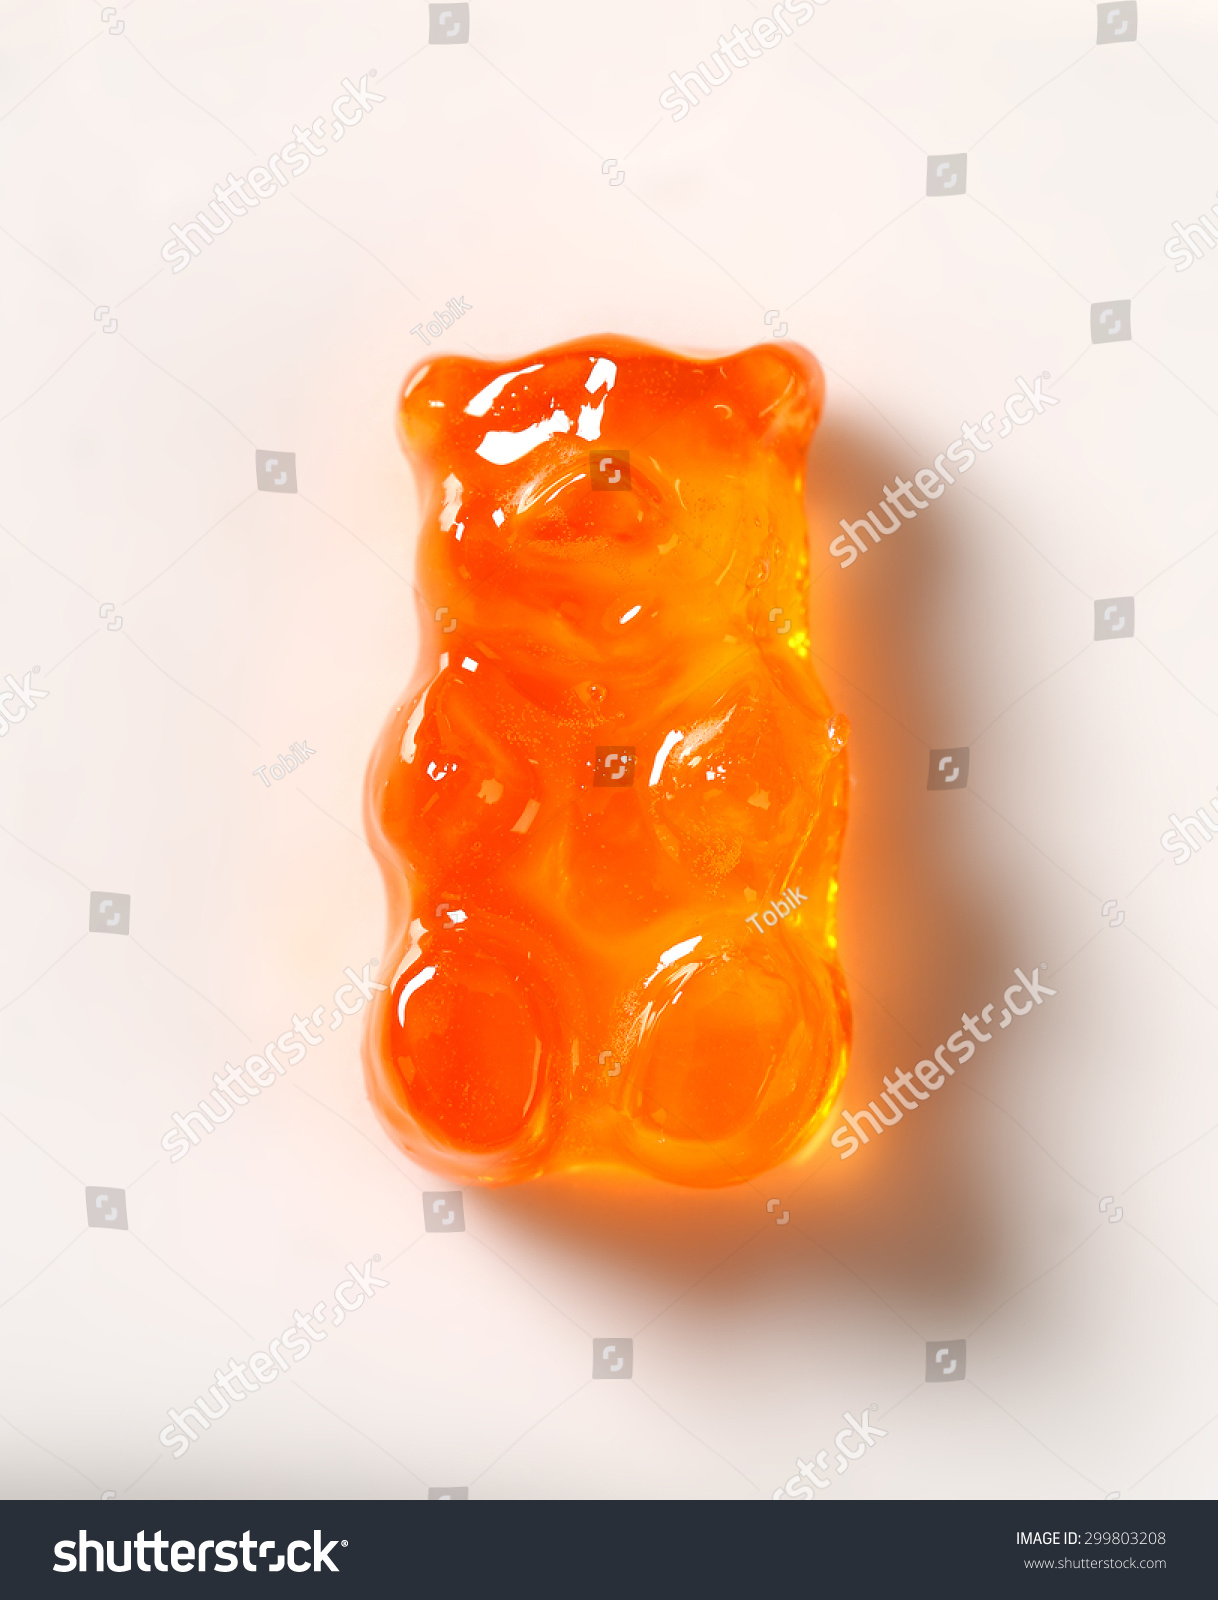 Fruit Flavored Gummy Bears In Assorted Colors Stock Photo 299803208 ...